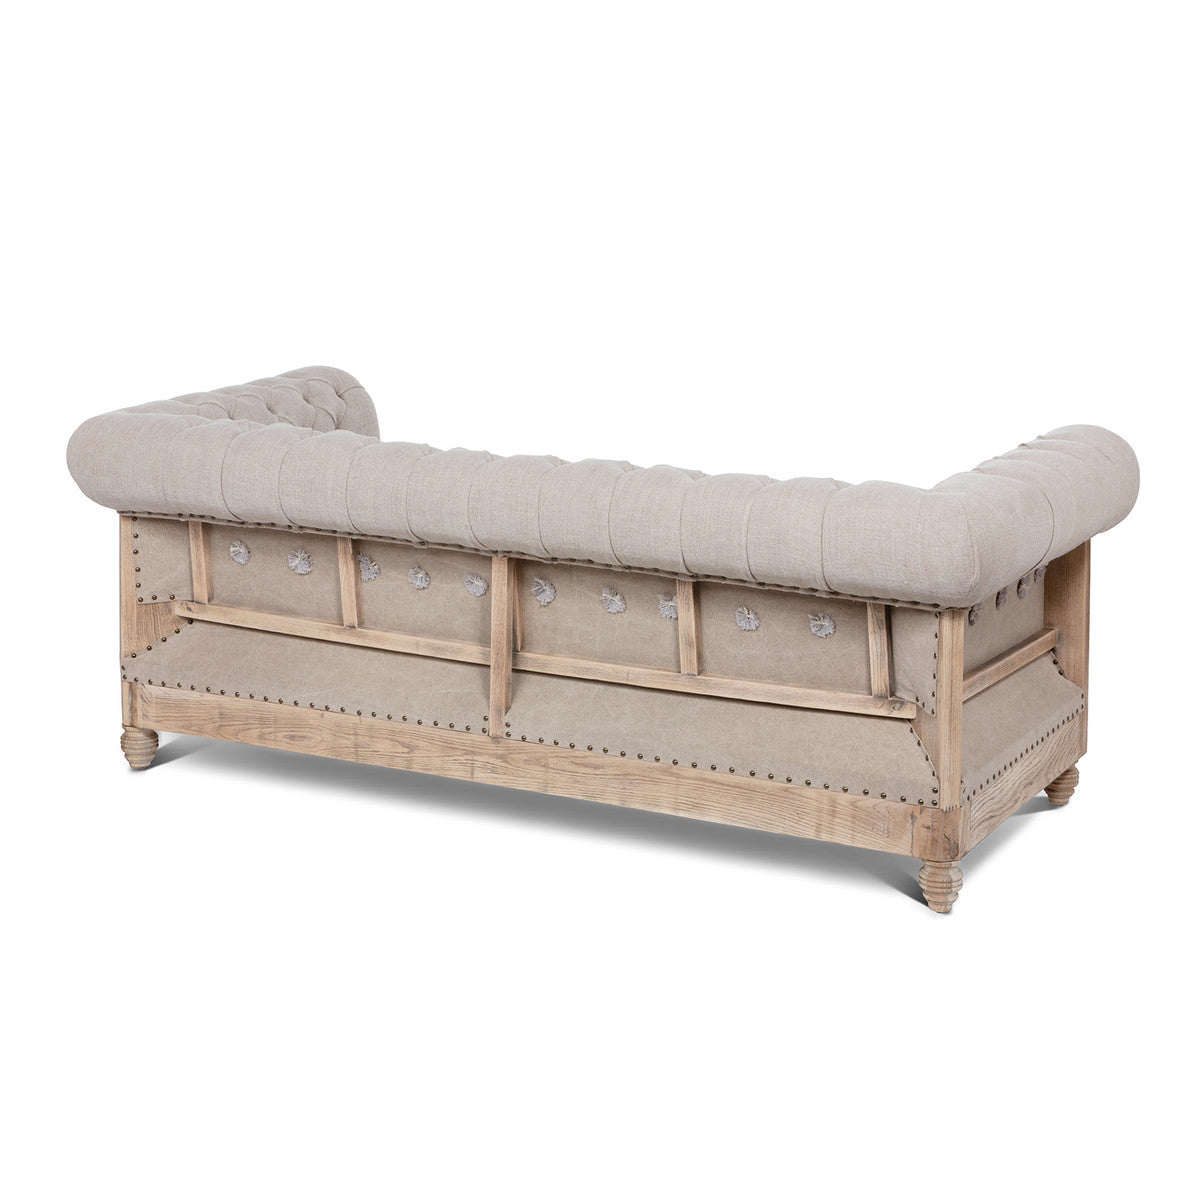 The Marseille Tufted Sofa -  Backordered